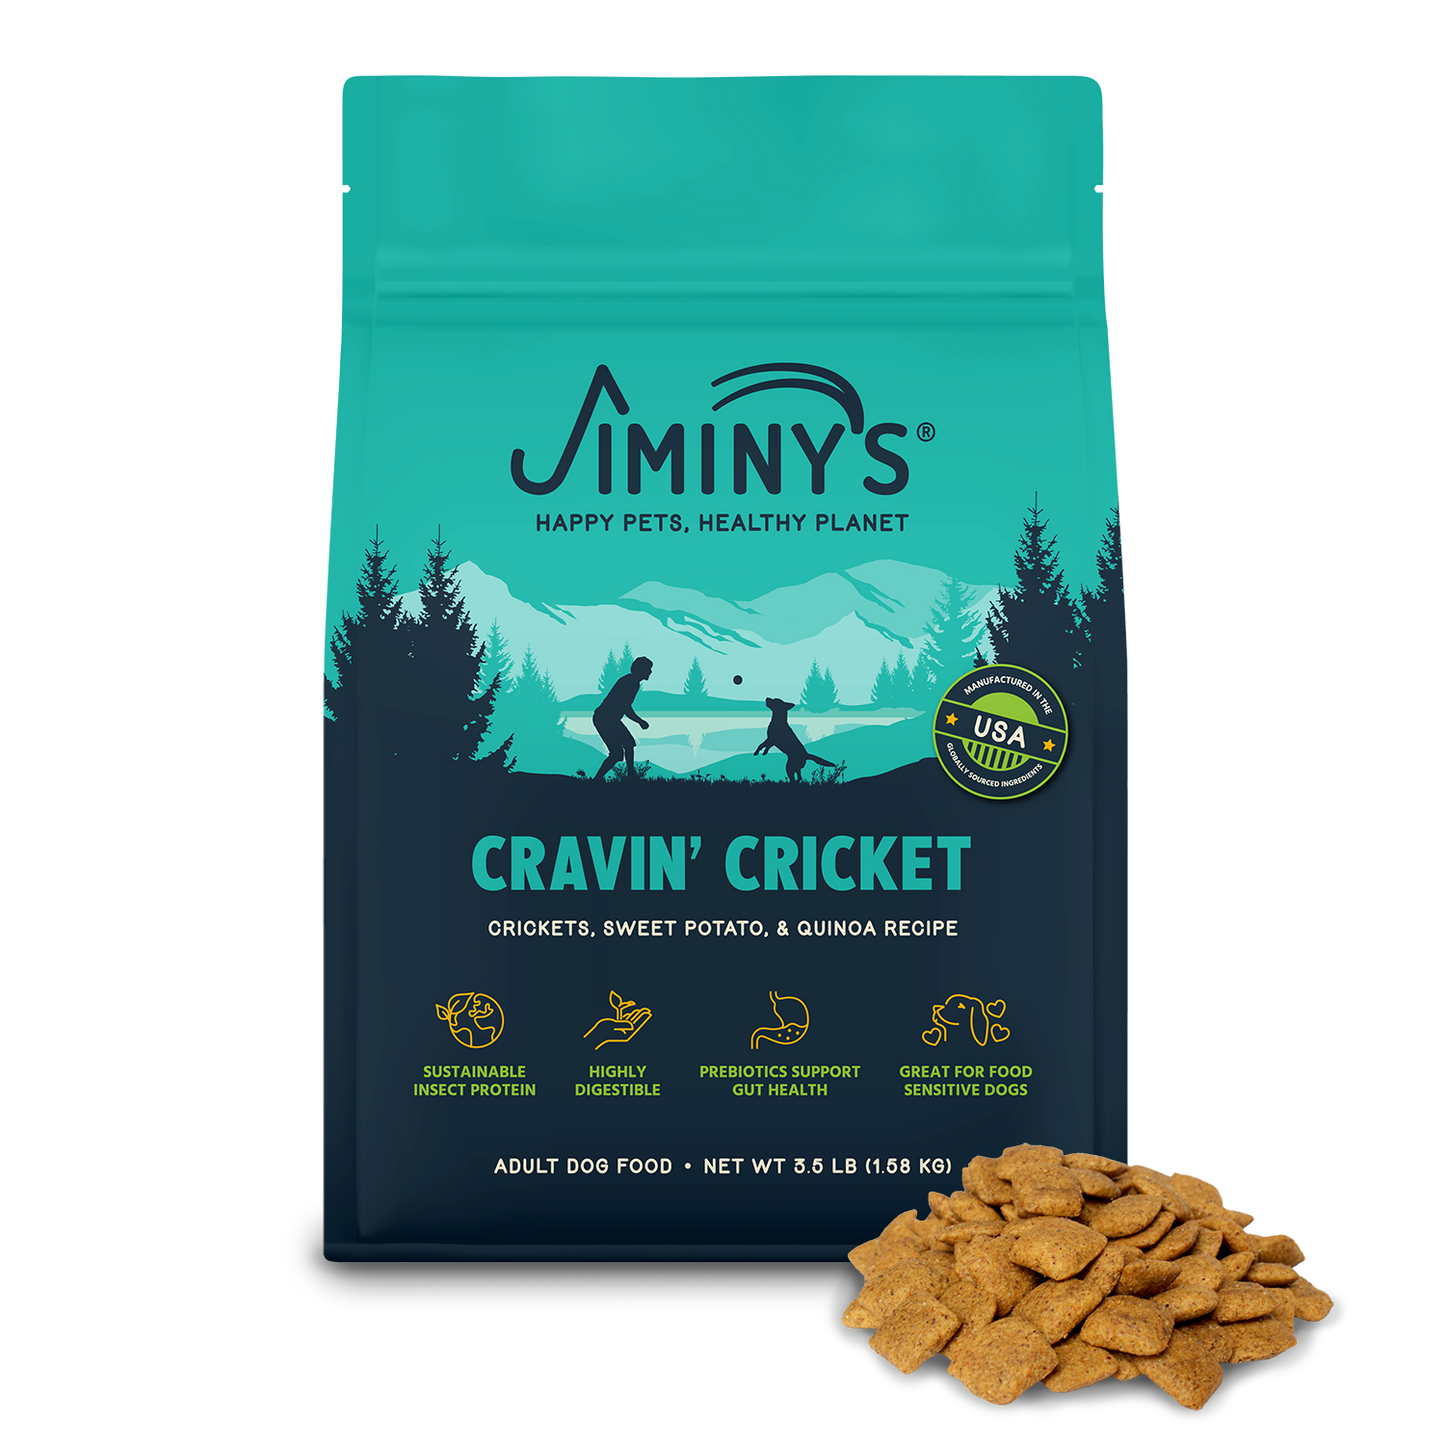 A picture of Jiminy's Cravin' Cricket dog food made with sustainable cricket protein. Food in front of bag.